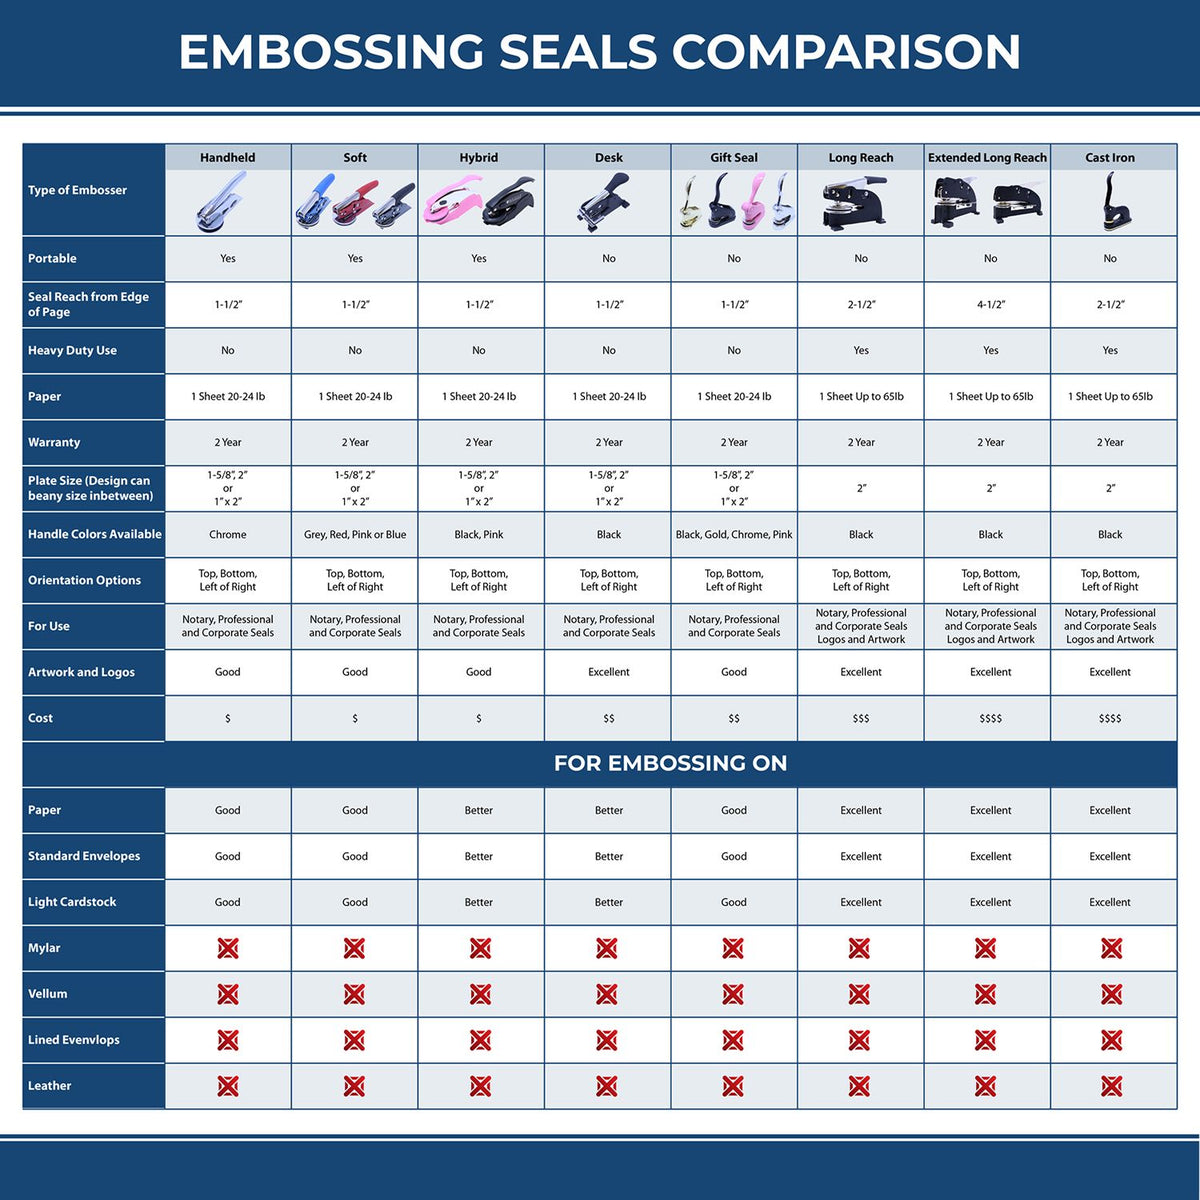 A comparison chart for the different types of mount models available for the Heavy Duty Cast Iron Alaska Architect Embosser.